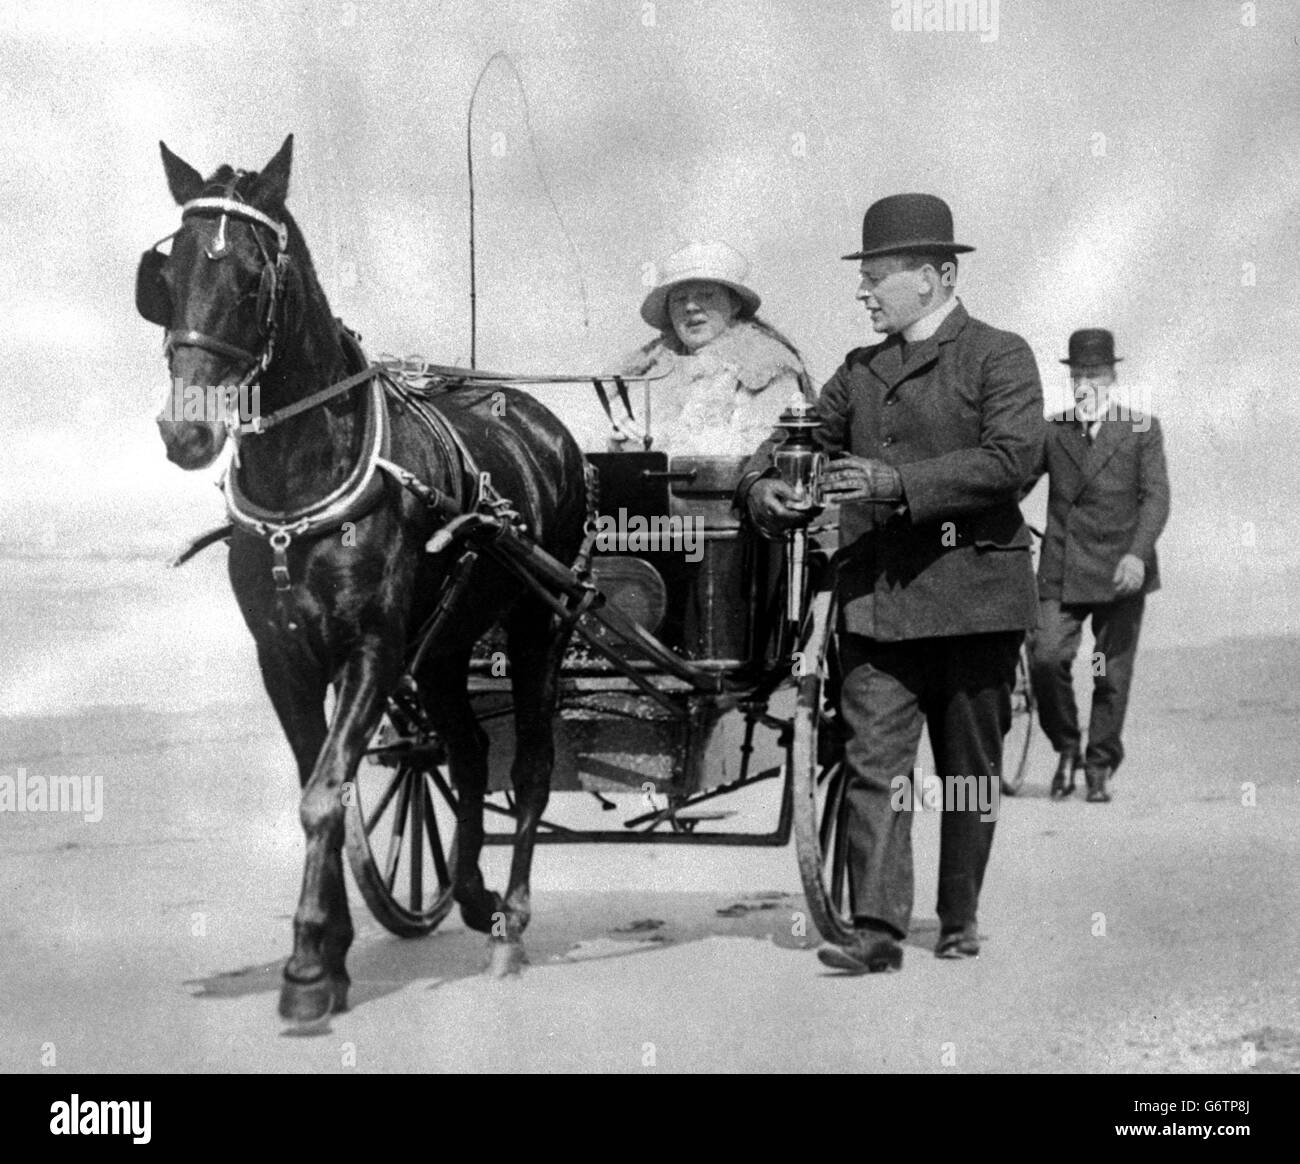 Princess Juliana, who has just celebrated her 15th birthday, out for a ride on the sand at Scheveningen. Stock Photo